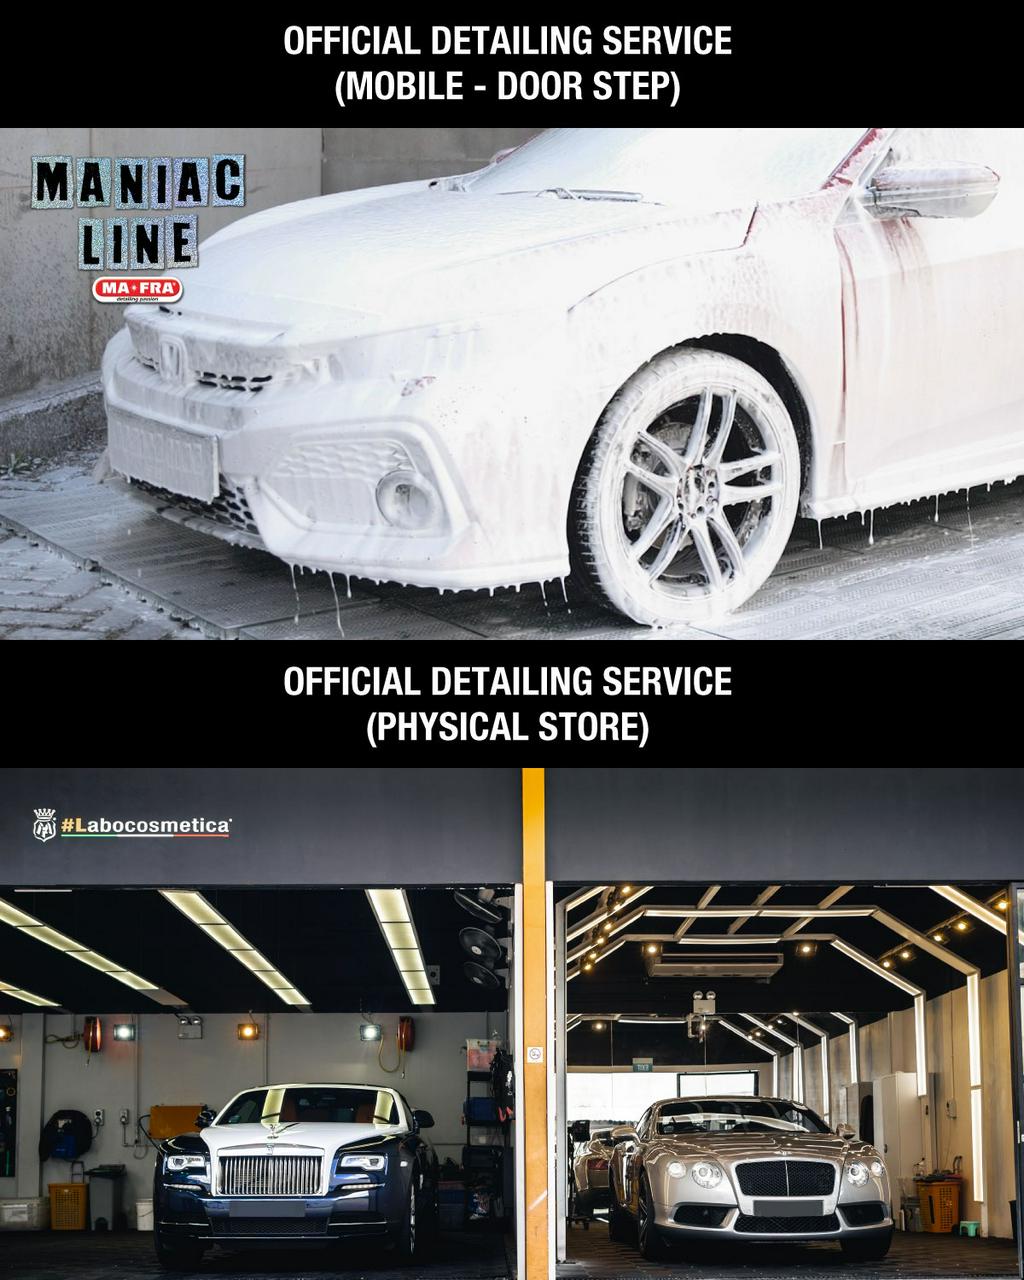 Mafra Maniac Line Car Alcantara Care Package (Hobbyist Basic CW28)  CERTIFIED & APPROVED Alcantara Cleaning and Maintenance, Deals